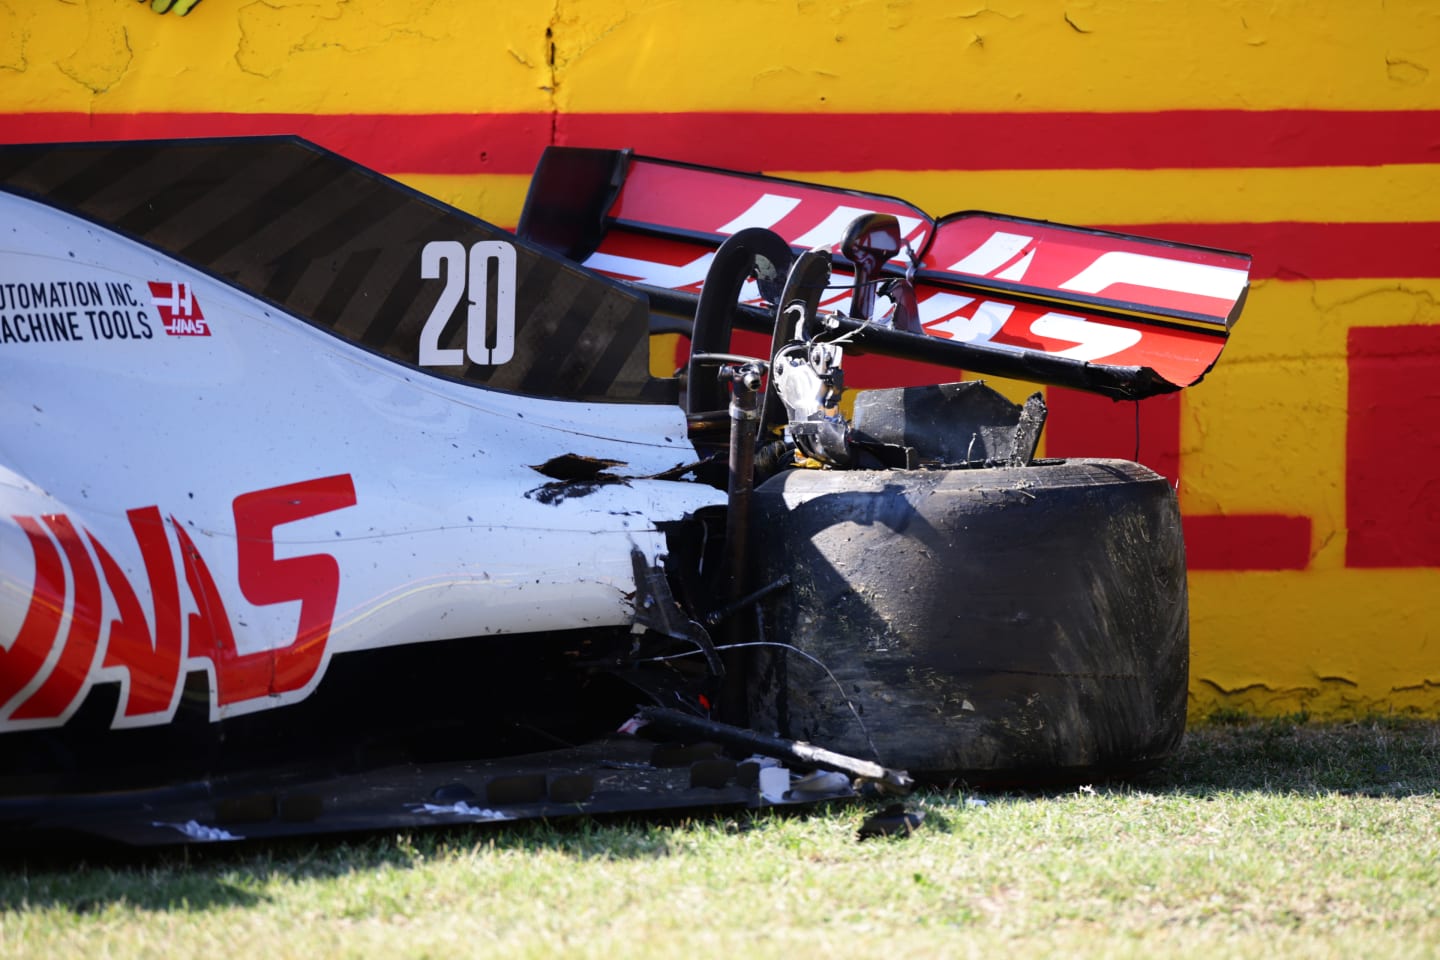 SCARPERIA, ITALY - SEPTEMBER 13: The broken car of Kevin Magnussen of Denmark driving the (20) Haas F1 Team VF-20 Ferrari is seen at the side of the track during the F1 Grand Prix of Tuscany at Mugello Circuit on September 13, 2020 in Scarperia, Italy. (Photo by Peter Fox/Getty Images)